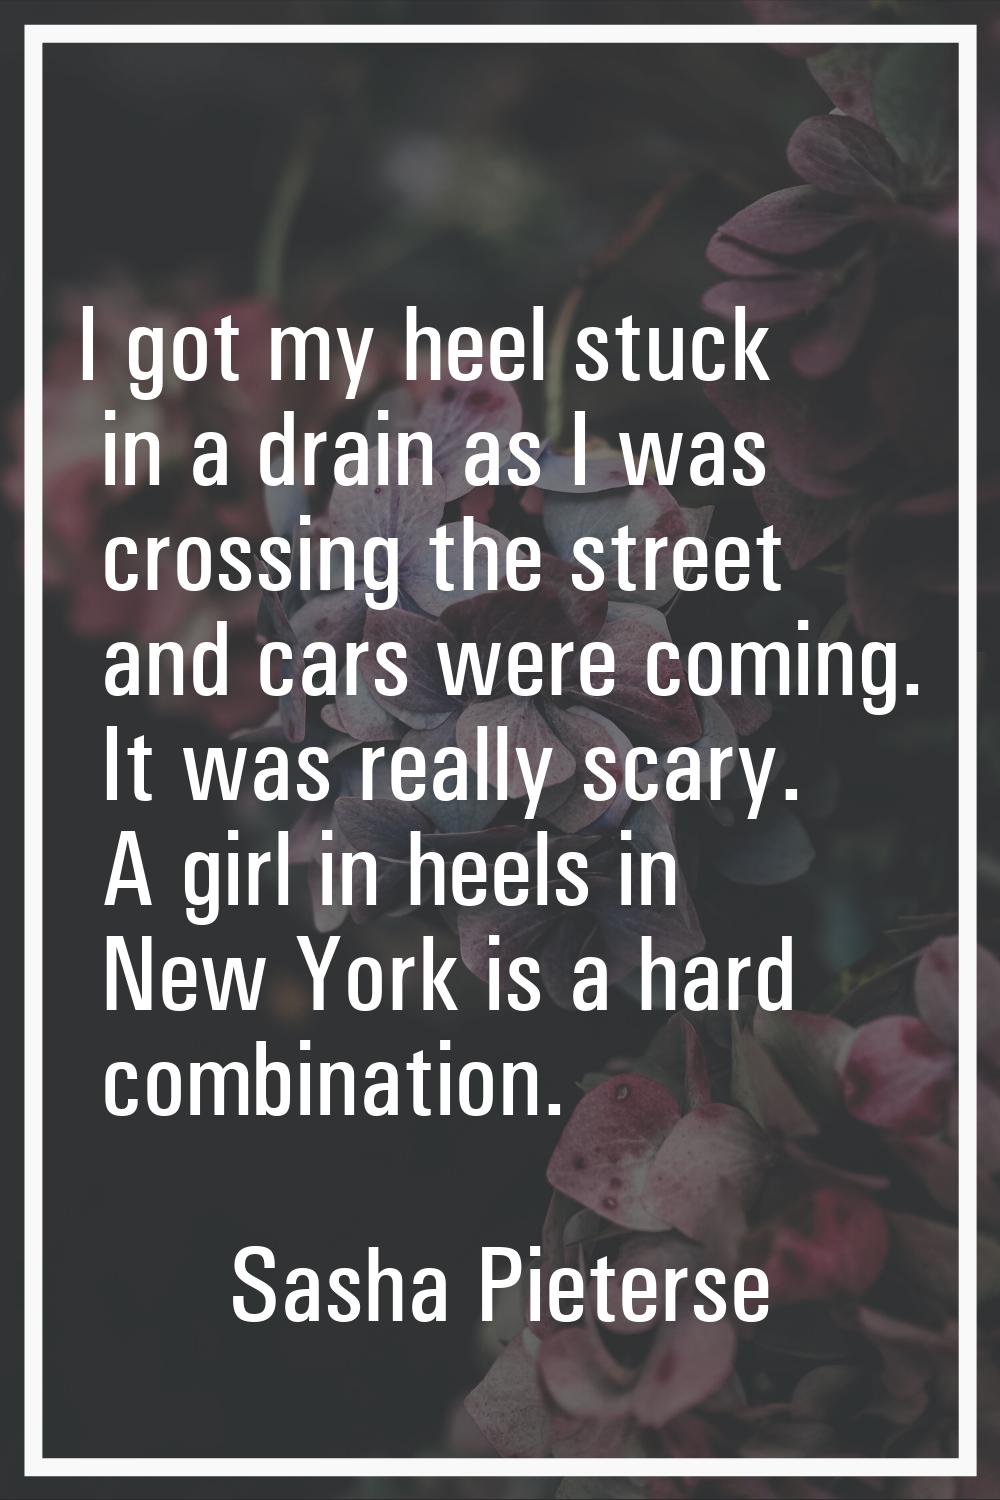 I got my heel stuck in a drain as I was crossing the street and cars were coming. It was really sca